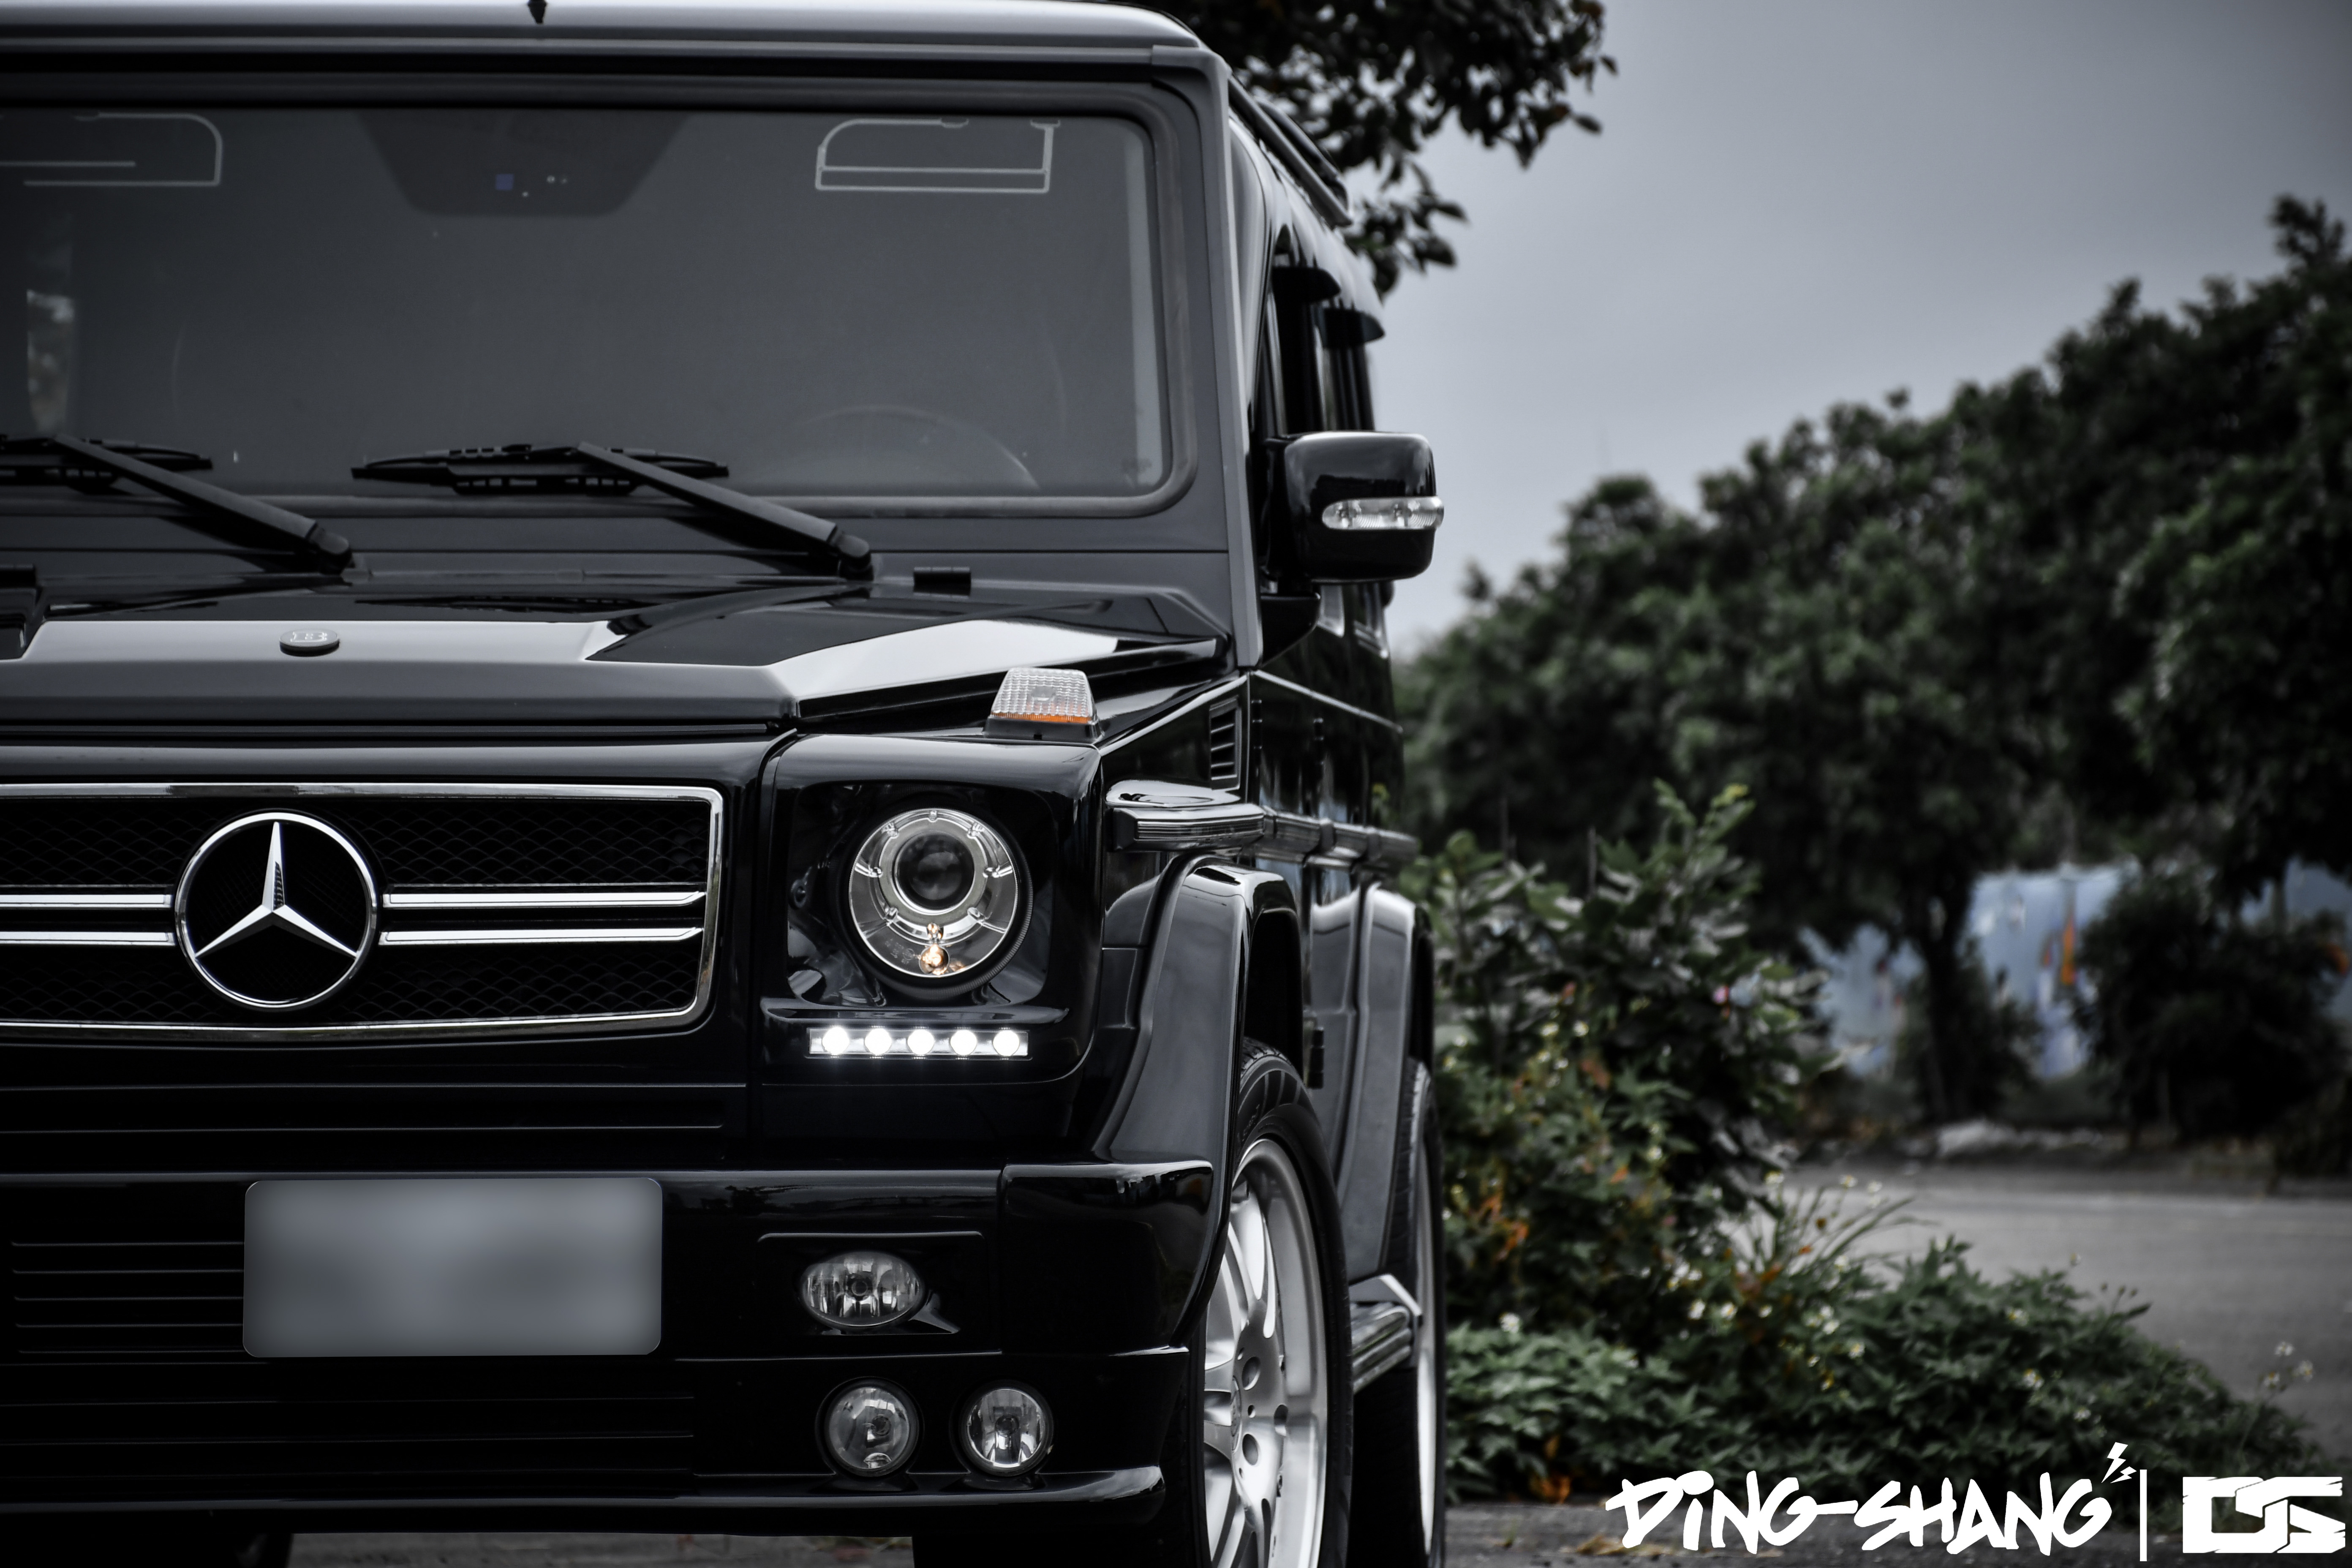 suv, cars, mercedes benz g500, front view, black, brabus, luxurious